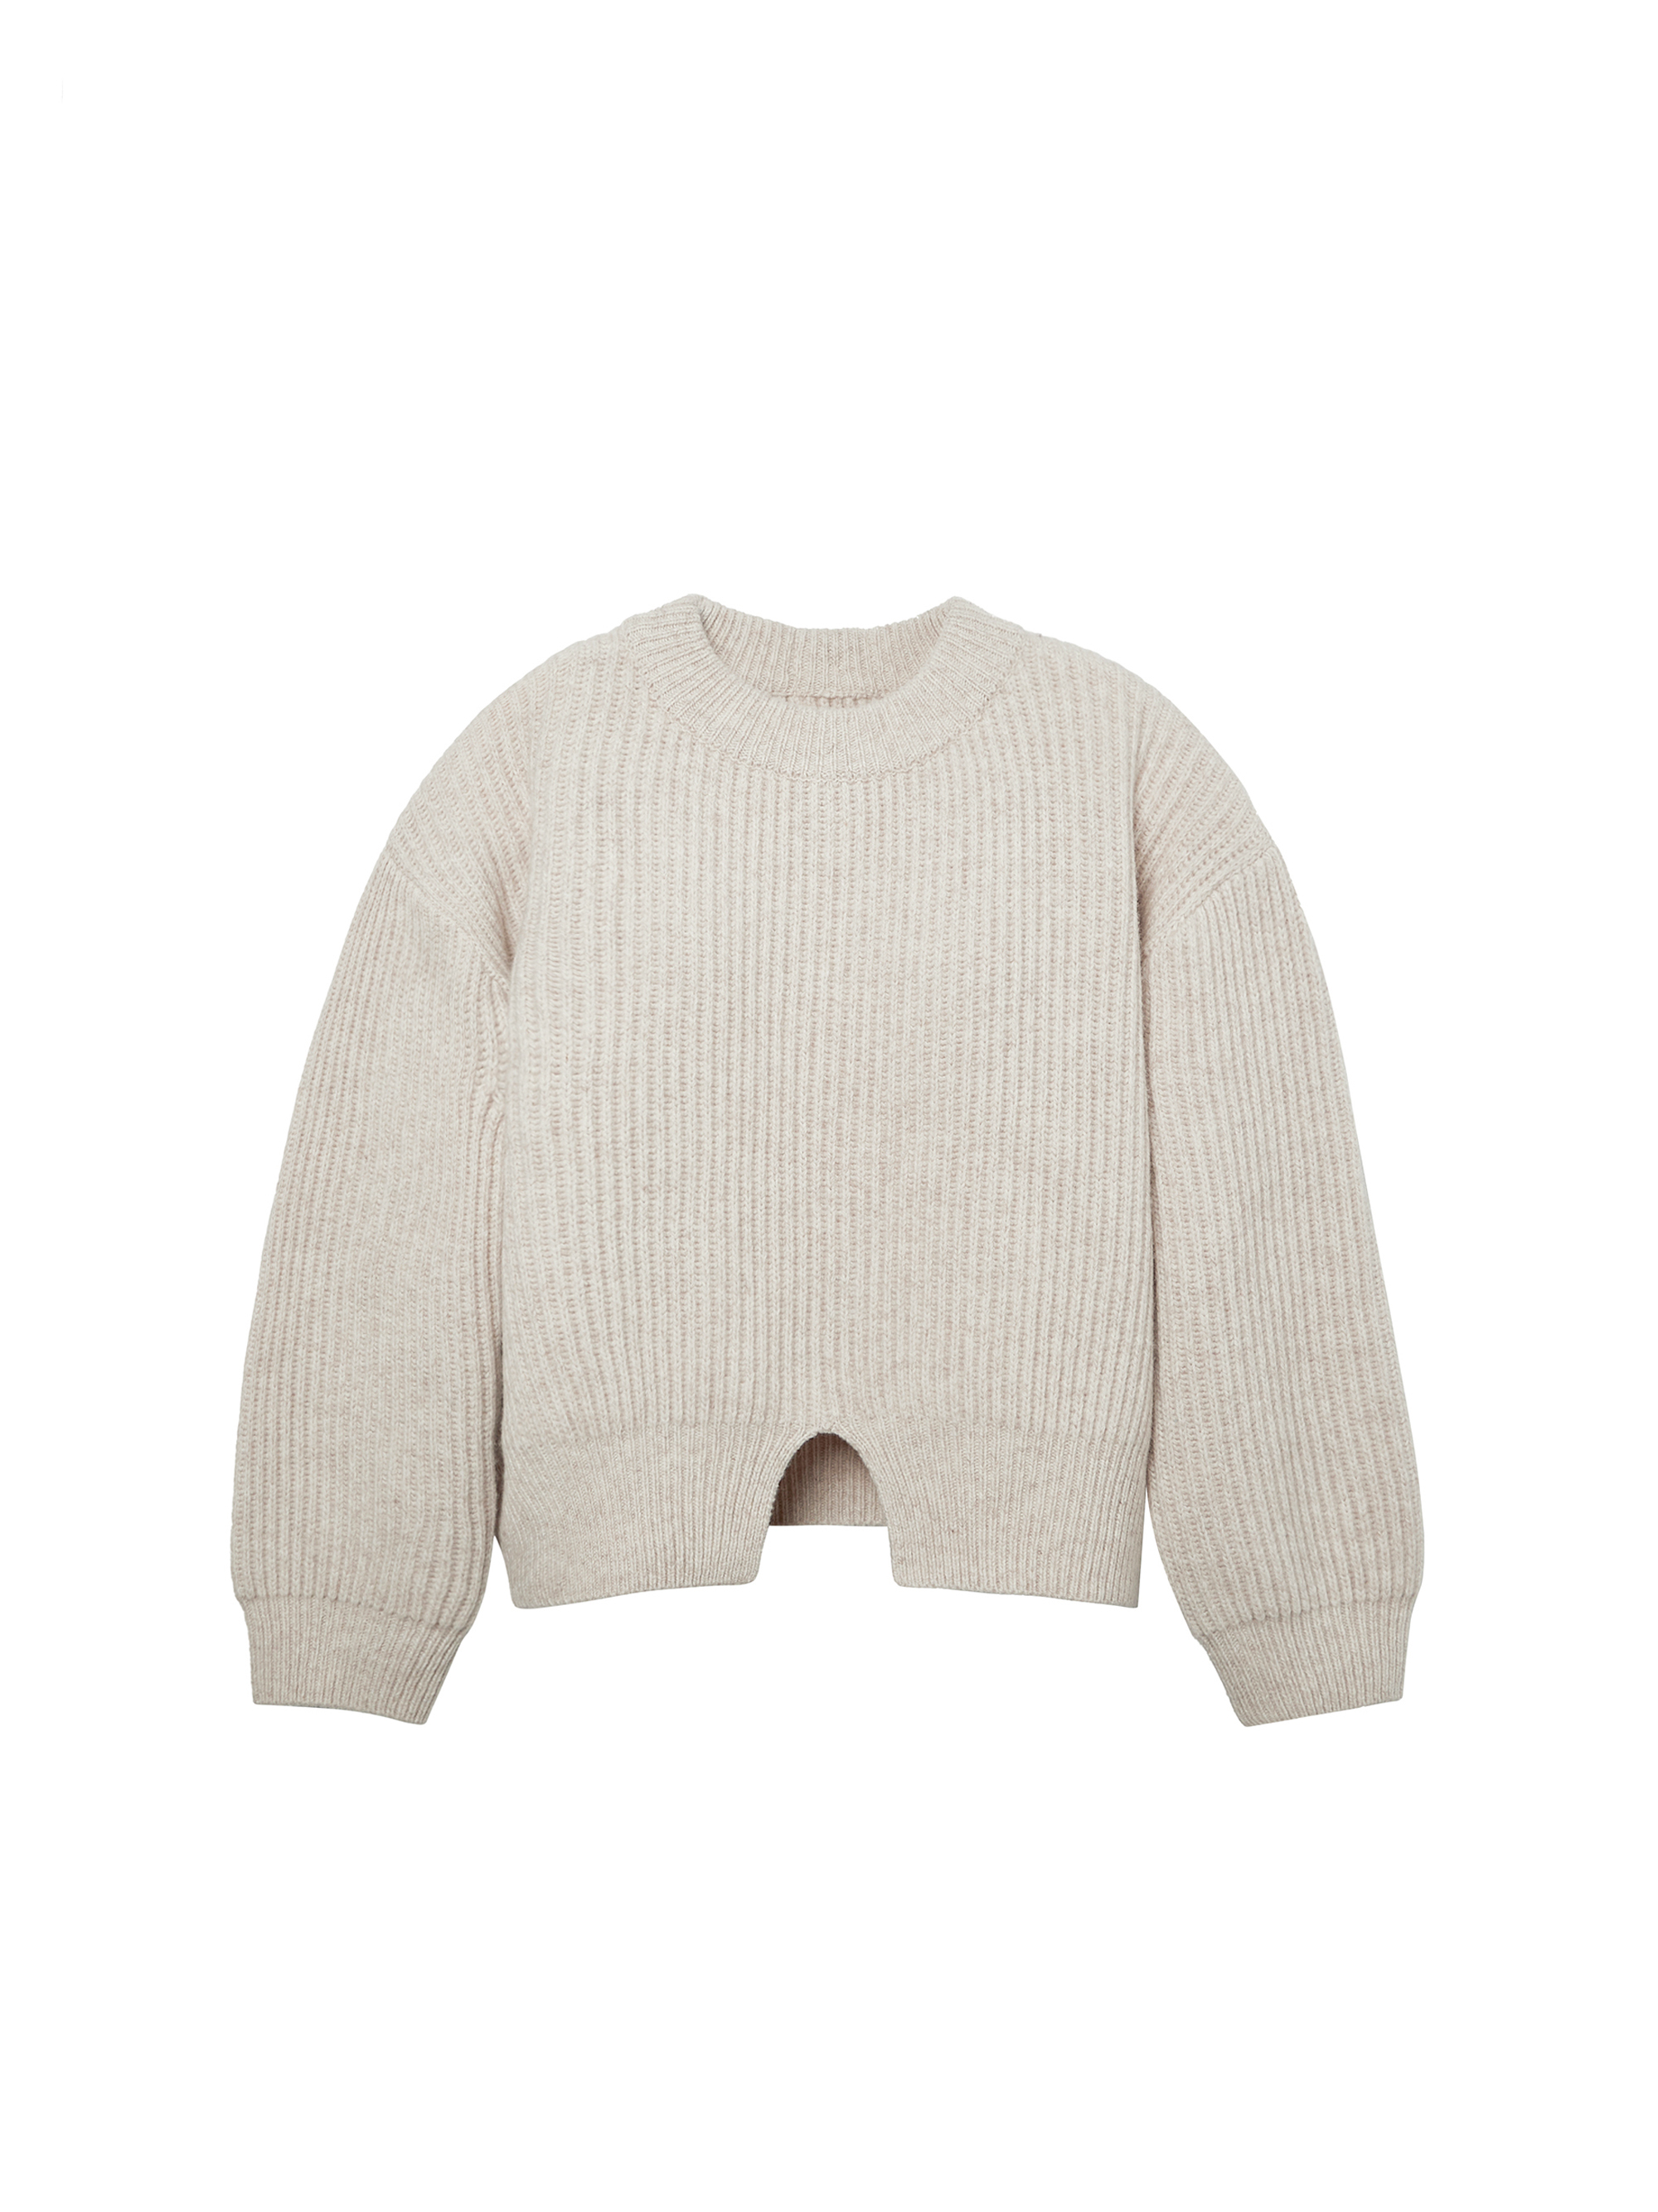 Jewel Button Detail Ribbed Sweater / 주얼 버튼 디테일 립 스웨터